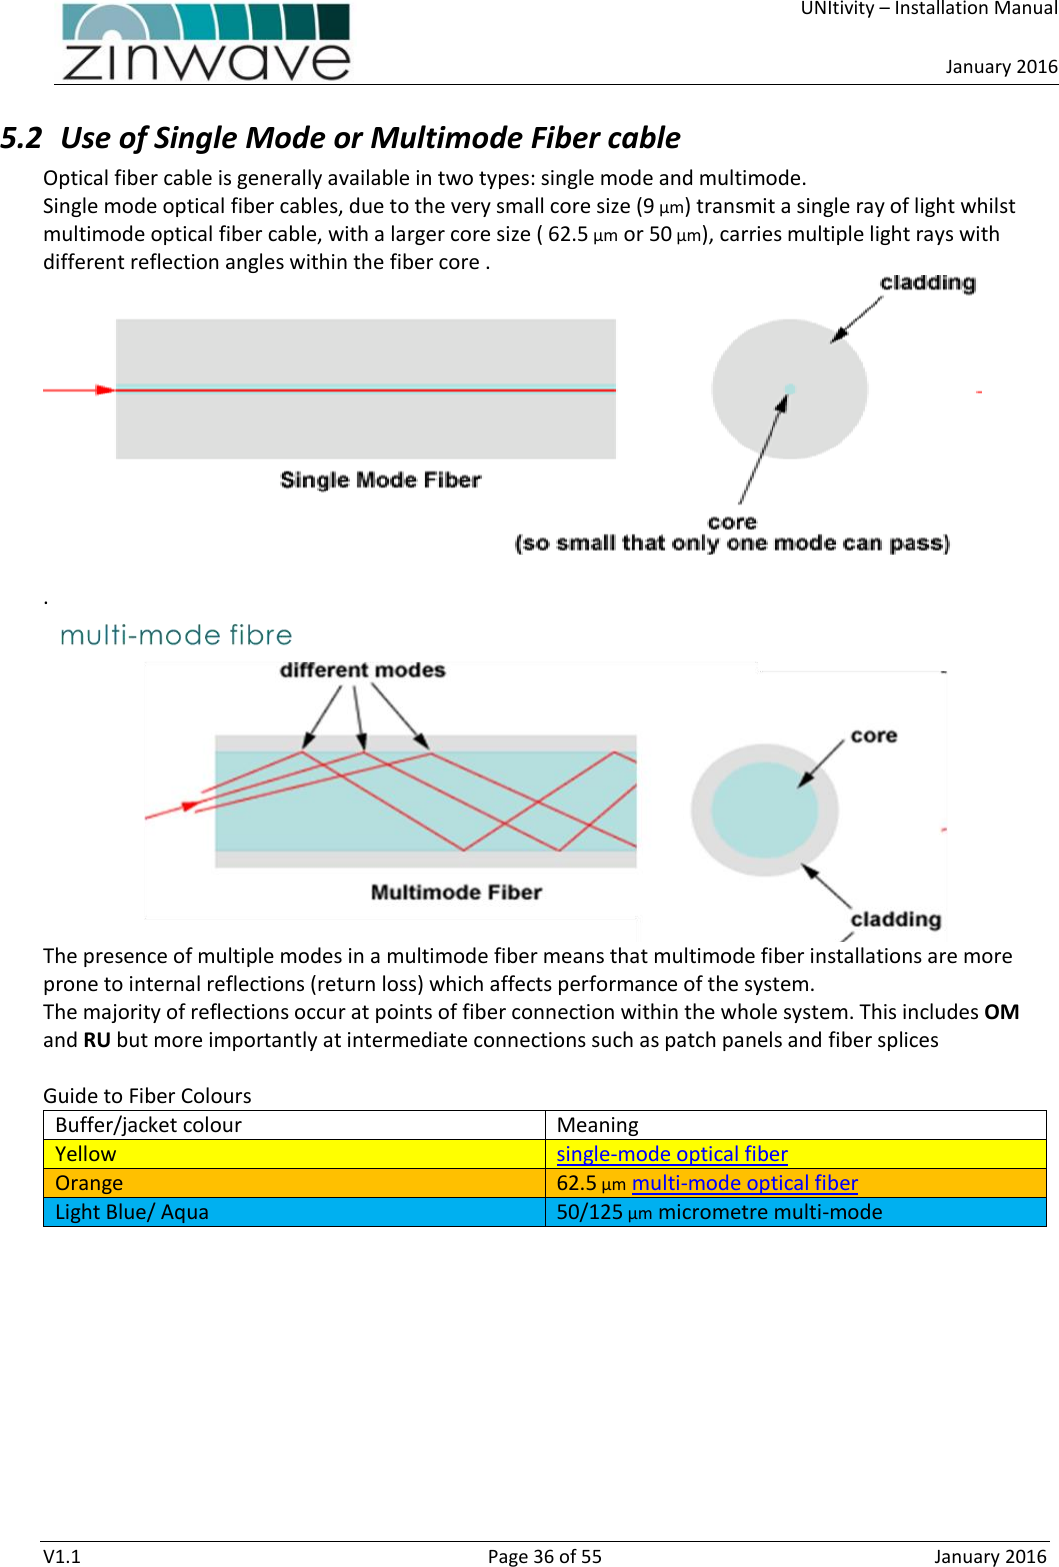     UNItivity – Installation Manual      January 2016  V1.1  Page 36 of 55  January 2016 5.2 Use of Single Mode or Multimode Fiber cable Optical fiber cable is generally available in two types: single mode and multimode.  Single mode optical fiber cables, due to the very small core size (9 µm) transmit a single ray of light whilst multimode optical fiber cable, with a larger core size ( 62.5 µm or 50 µm), carries multiple light rays with different reflection angles within the fiber core .    .  The presence of multiple modes in a multimode fiber means that multimode fiber installations are more prone to internal reflections (return loss) which affects performance of the system. The majority of reflections occur at points of fiber connection within the whole system. This includes OM and RU but more importantly at intermediate connections such as patch panels and fiber splices   Guide to Fiber Colours Buffer/jacket colour Meaning Yellow single-mode optical fiber Orange 62.5 µm multi-mode optical fiber Light Blue/ Aqua 50/125 µm micrometre multi-mode 